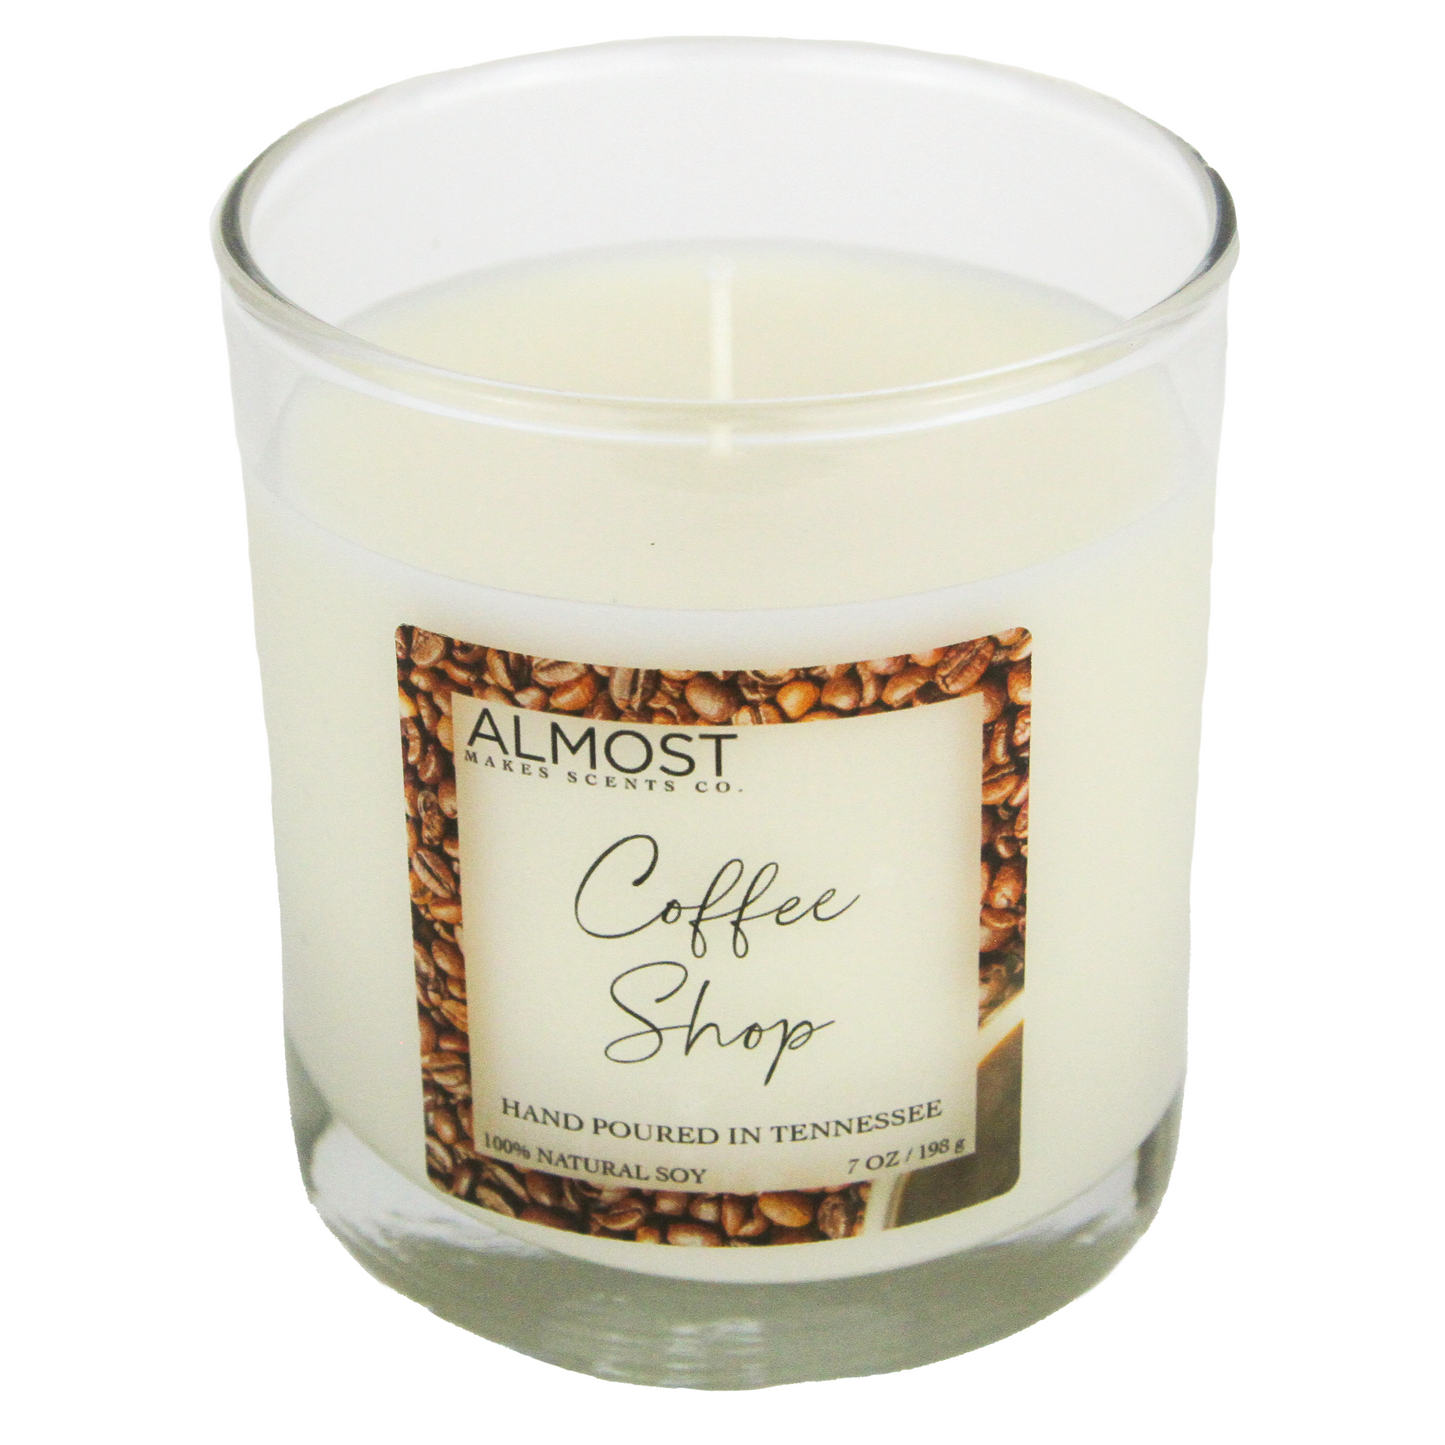 Coffee Shop Handcrafted All Soy candle 7oz